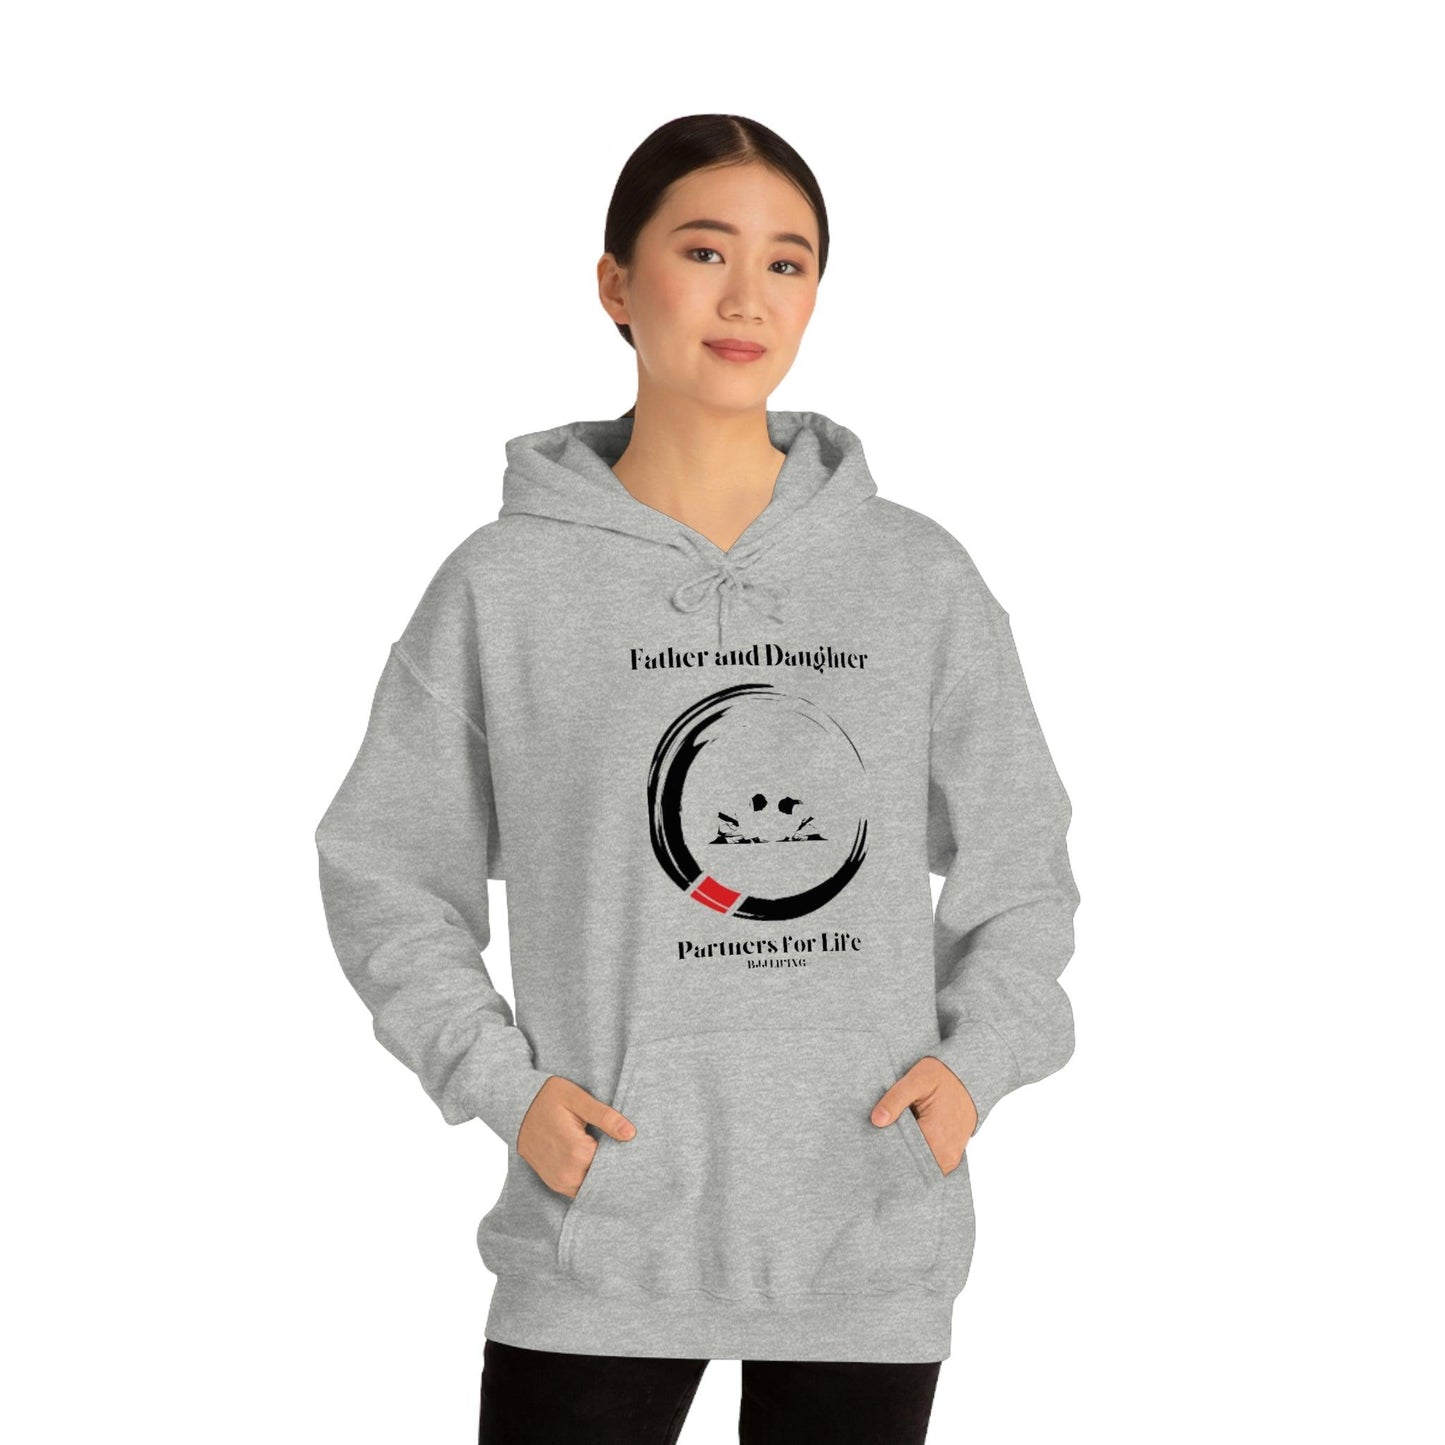 Father and Daughter Partners for Life BJJ Hoodie - BJJ Living - DTG, gift for dad, gift for daughter, Gift for father, Gift for her, Gift for him, Holiday fashion, Hoodies, Men's Clothing, Regular fit, Sweatshirts, Unisex, Women's Clothing